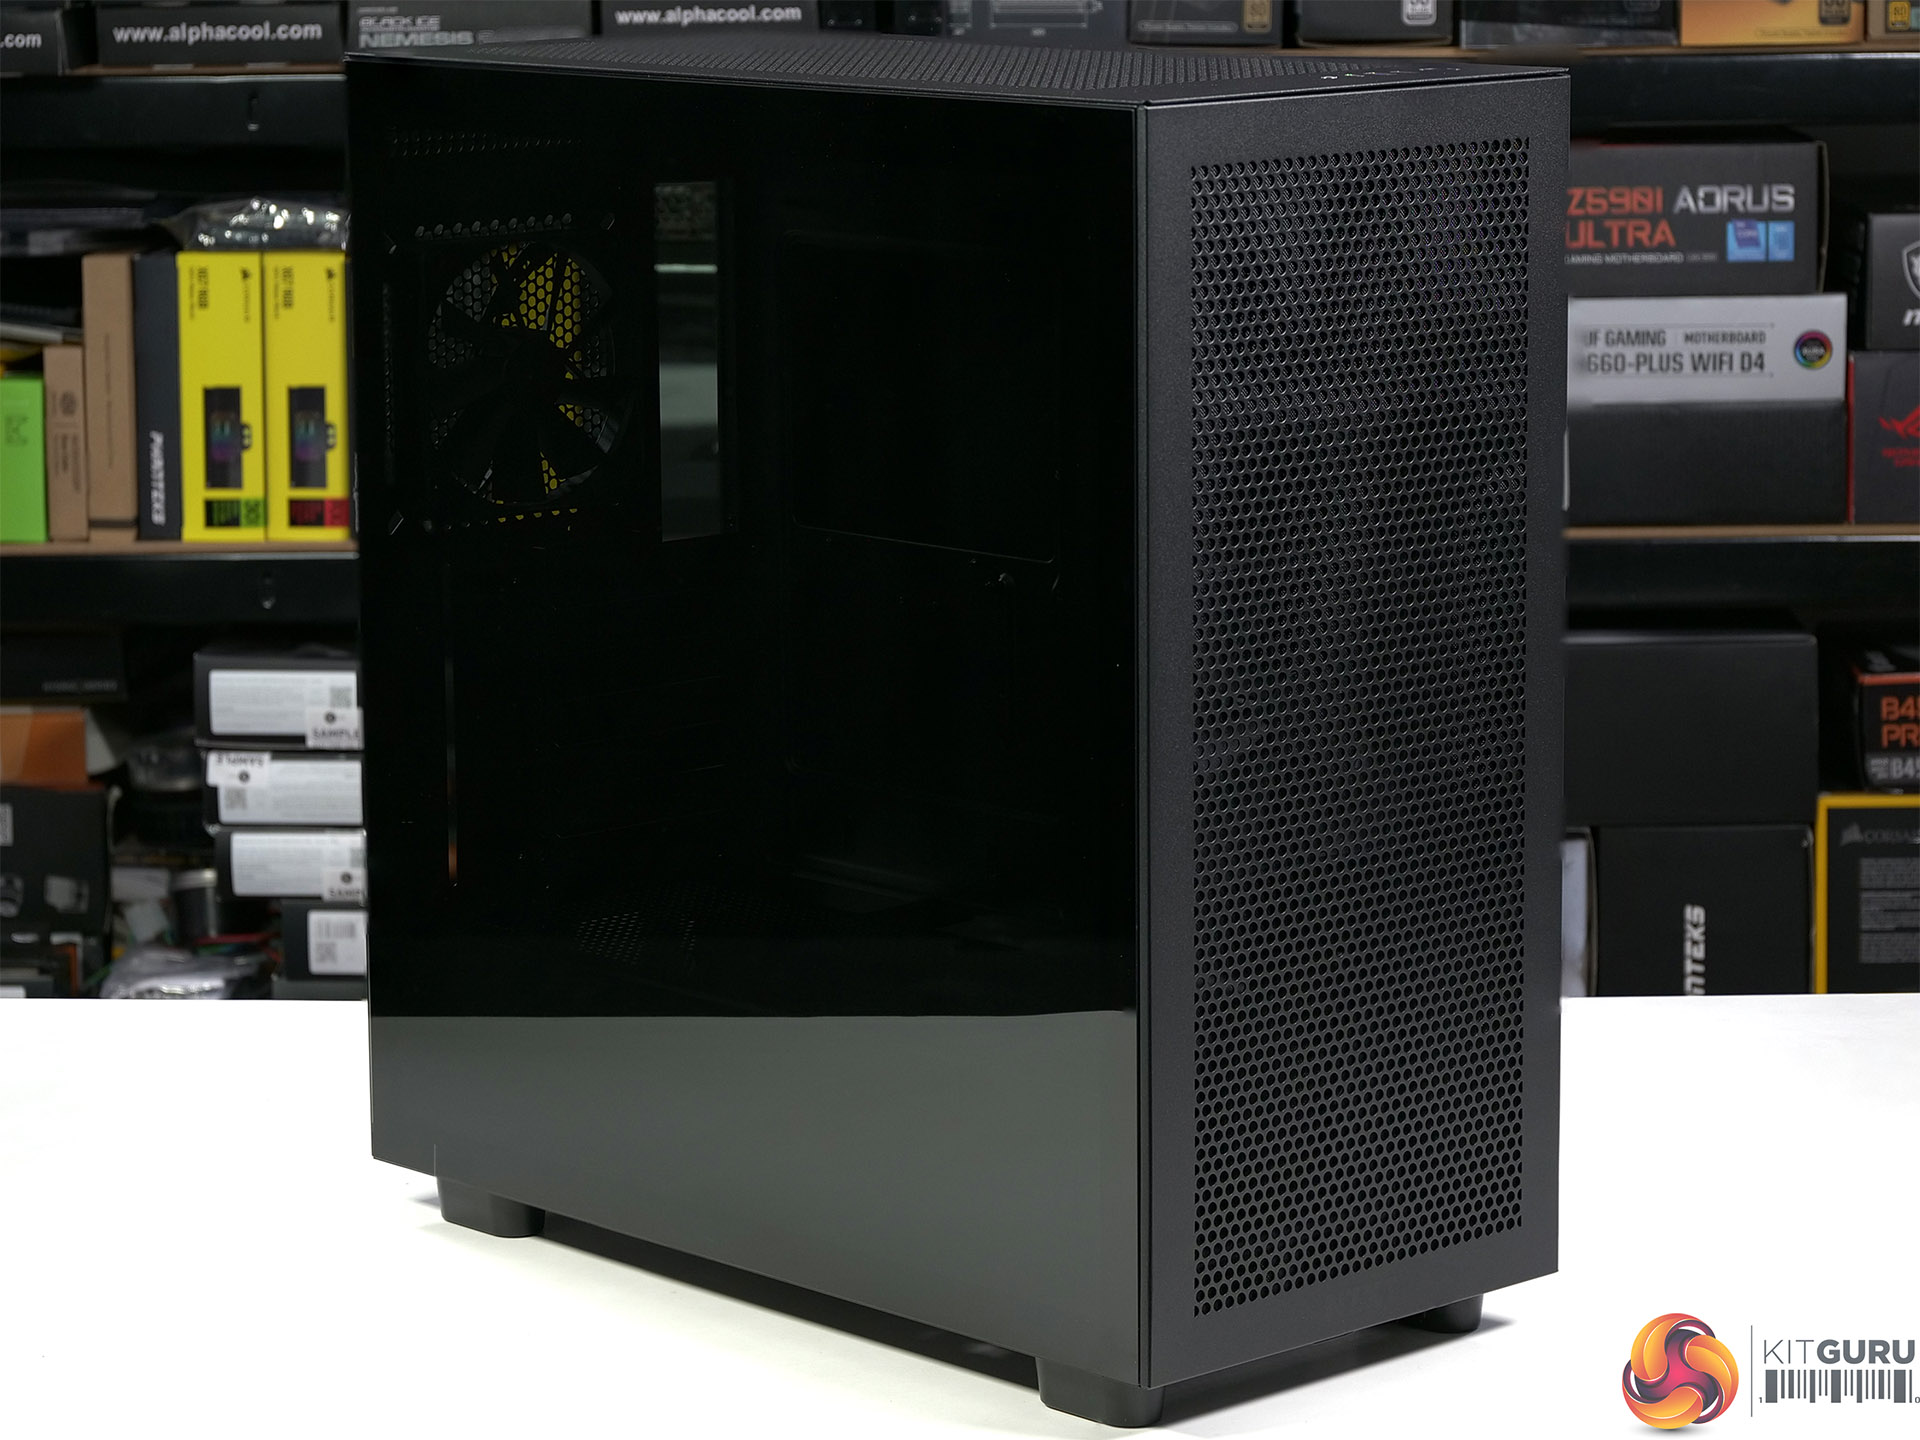 NZXT H7 Review – Go with the Flow